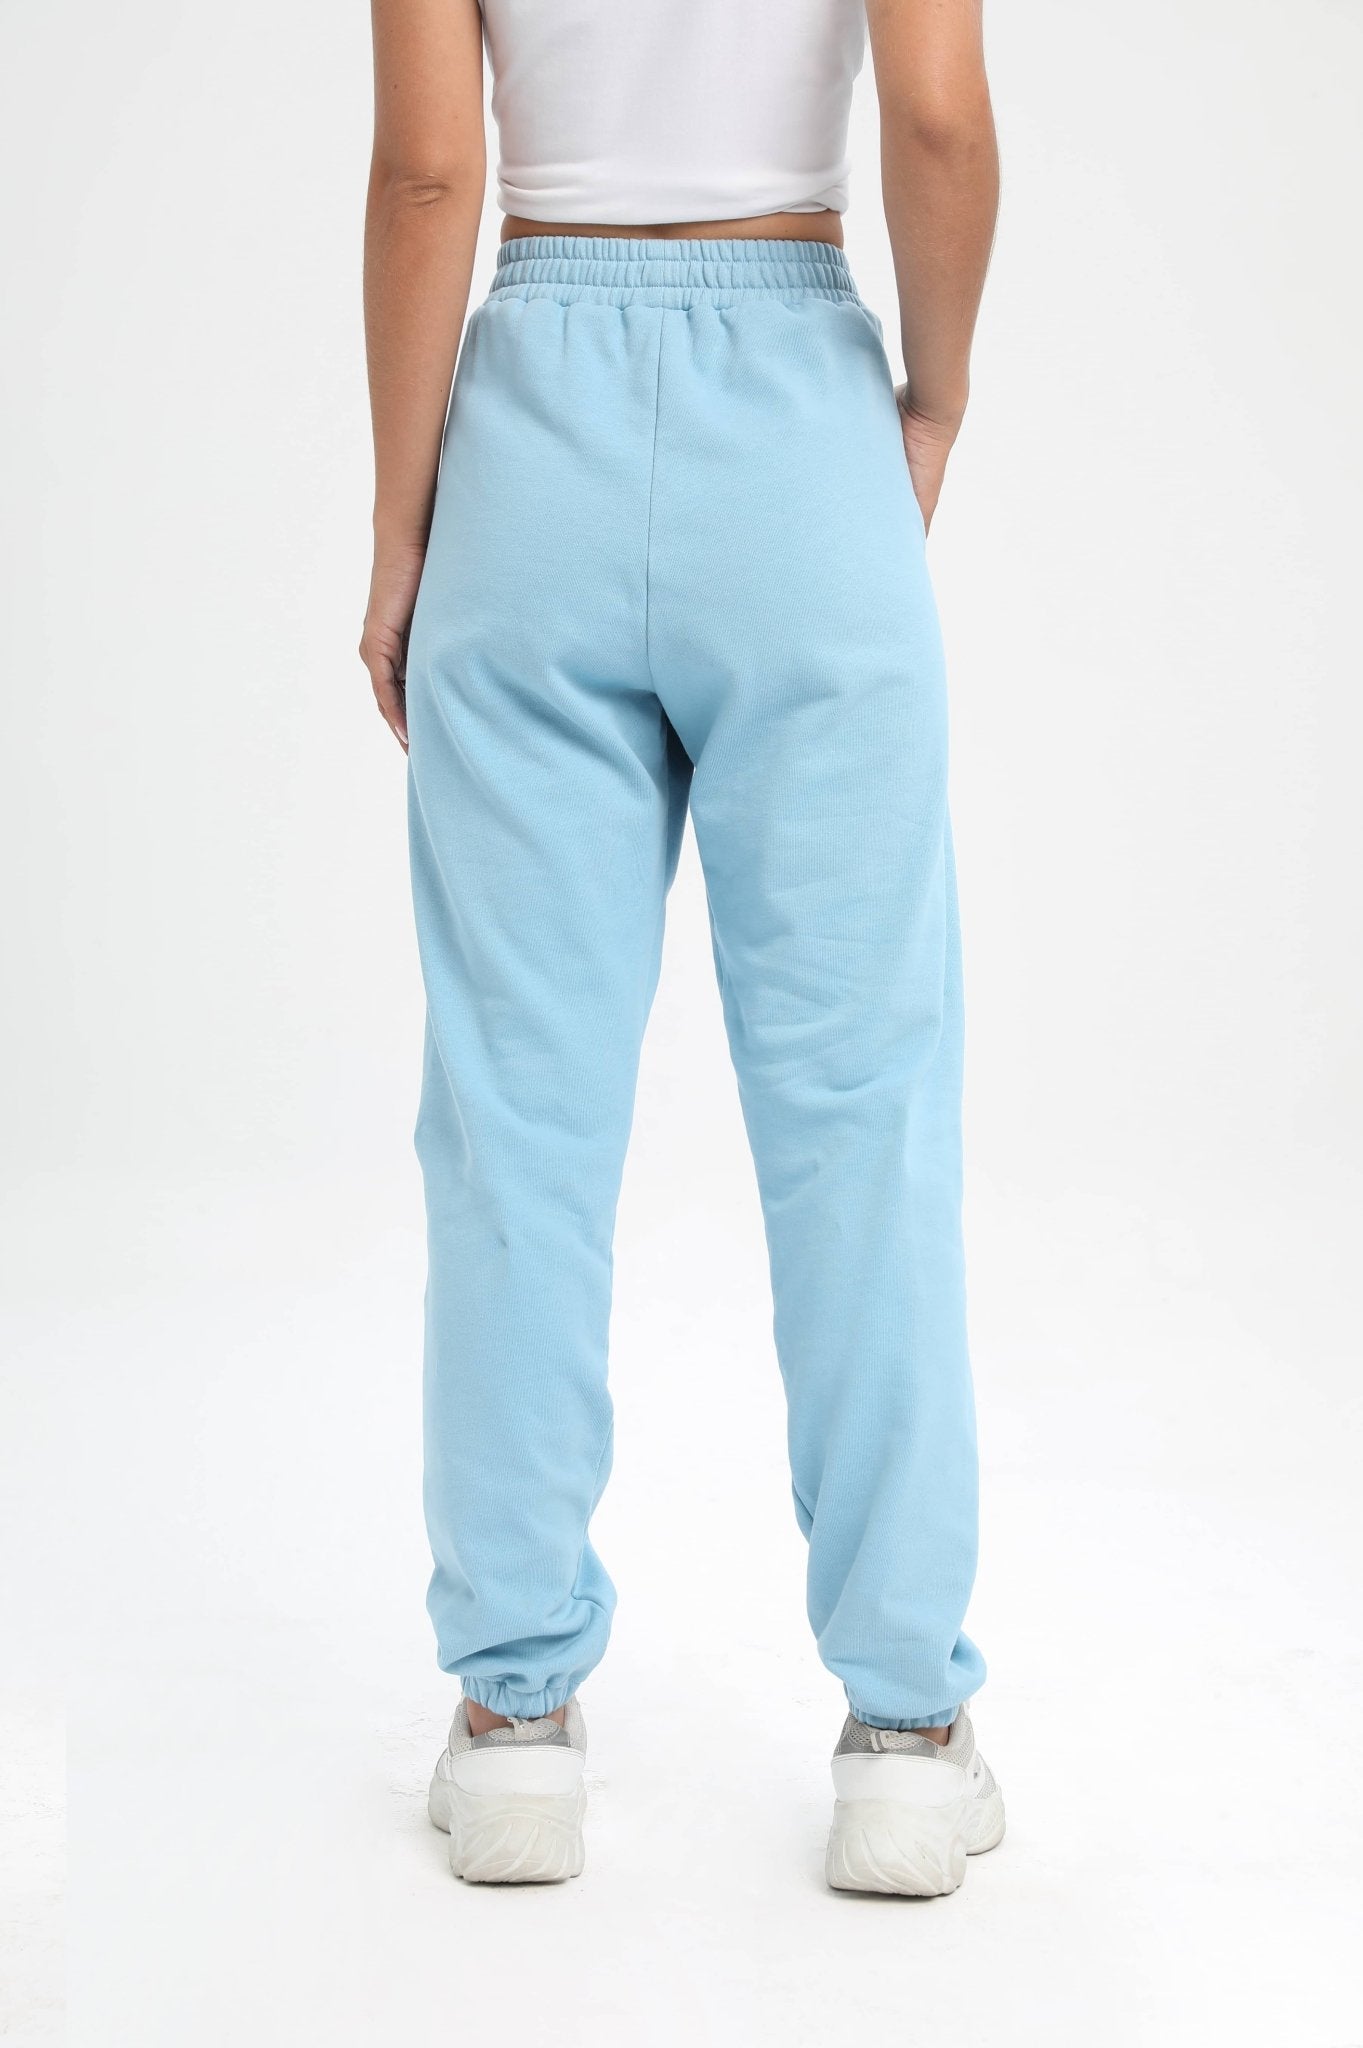 Relaxed Pocket Jogger - Calm Blue - MYSILVERWIND